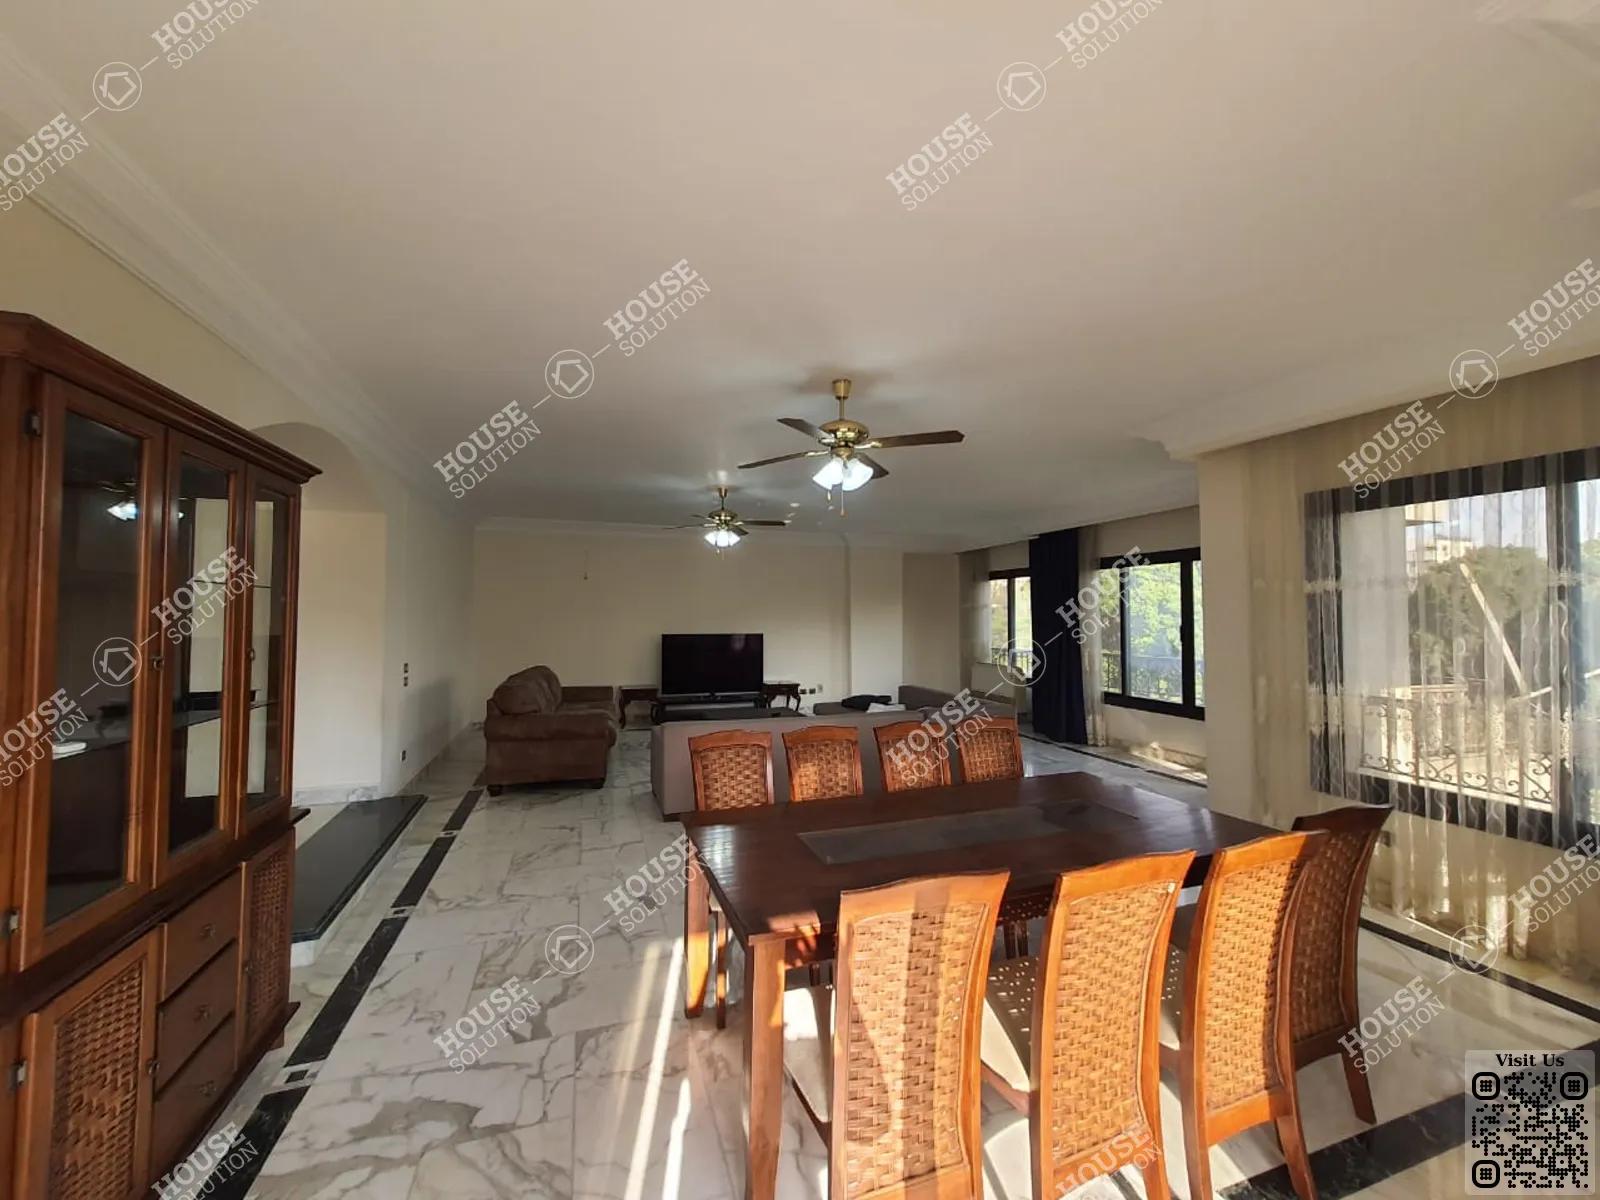 DINING AREA @ Apartments For Rent In Maadi Maadi Degla Area: 350 m² consists of 4 Bedrooms 4 Bathrooms Modern furnished 5 stars #5455-2